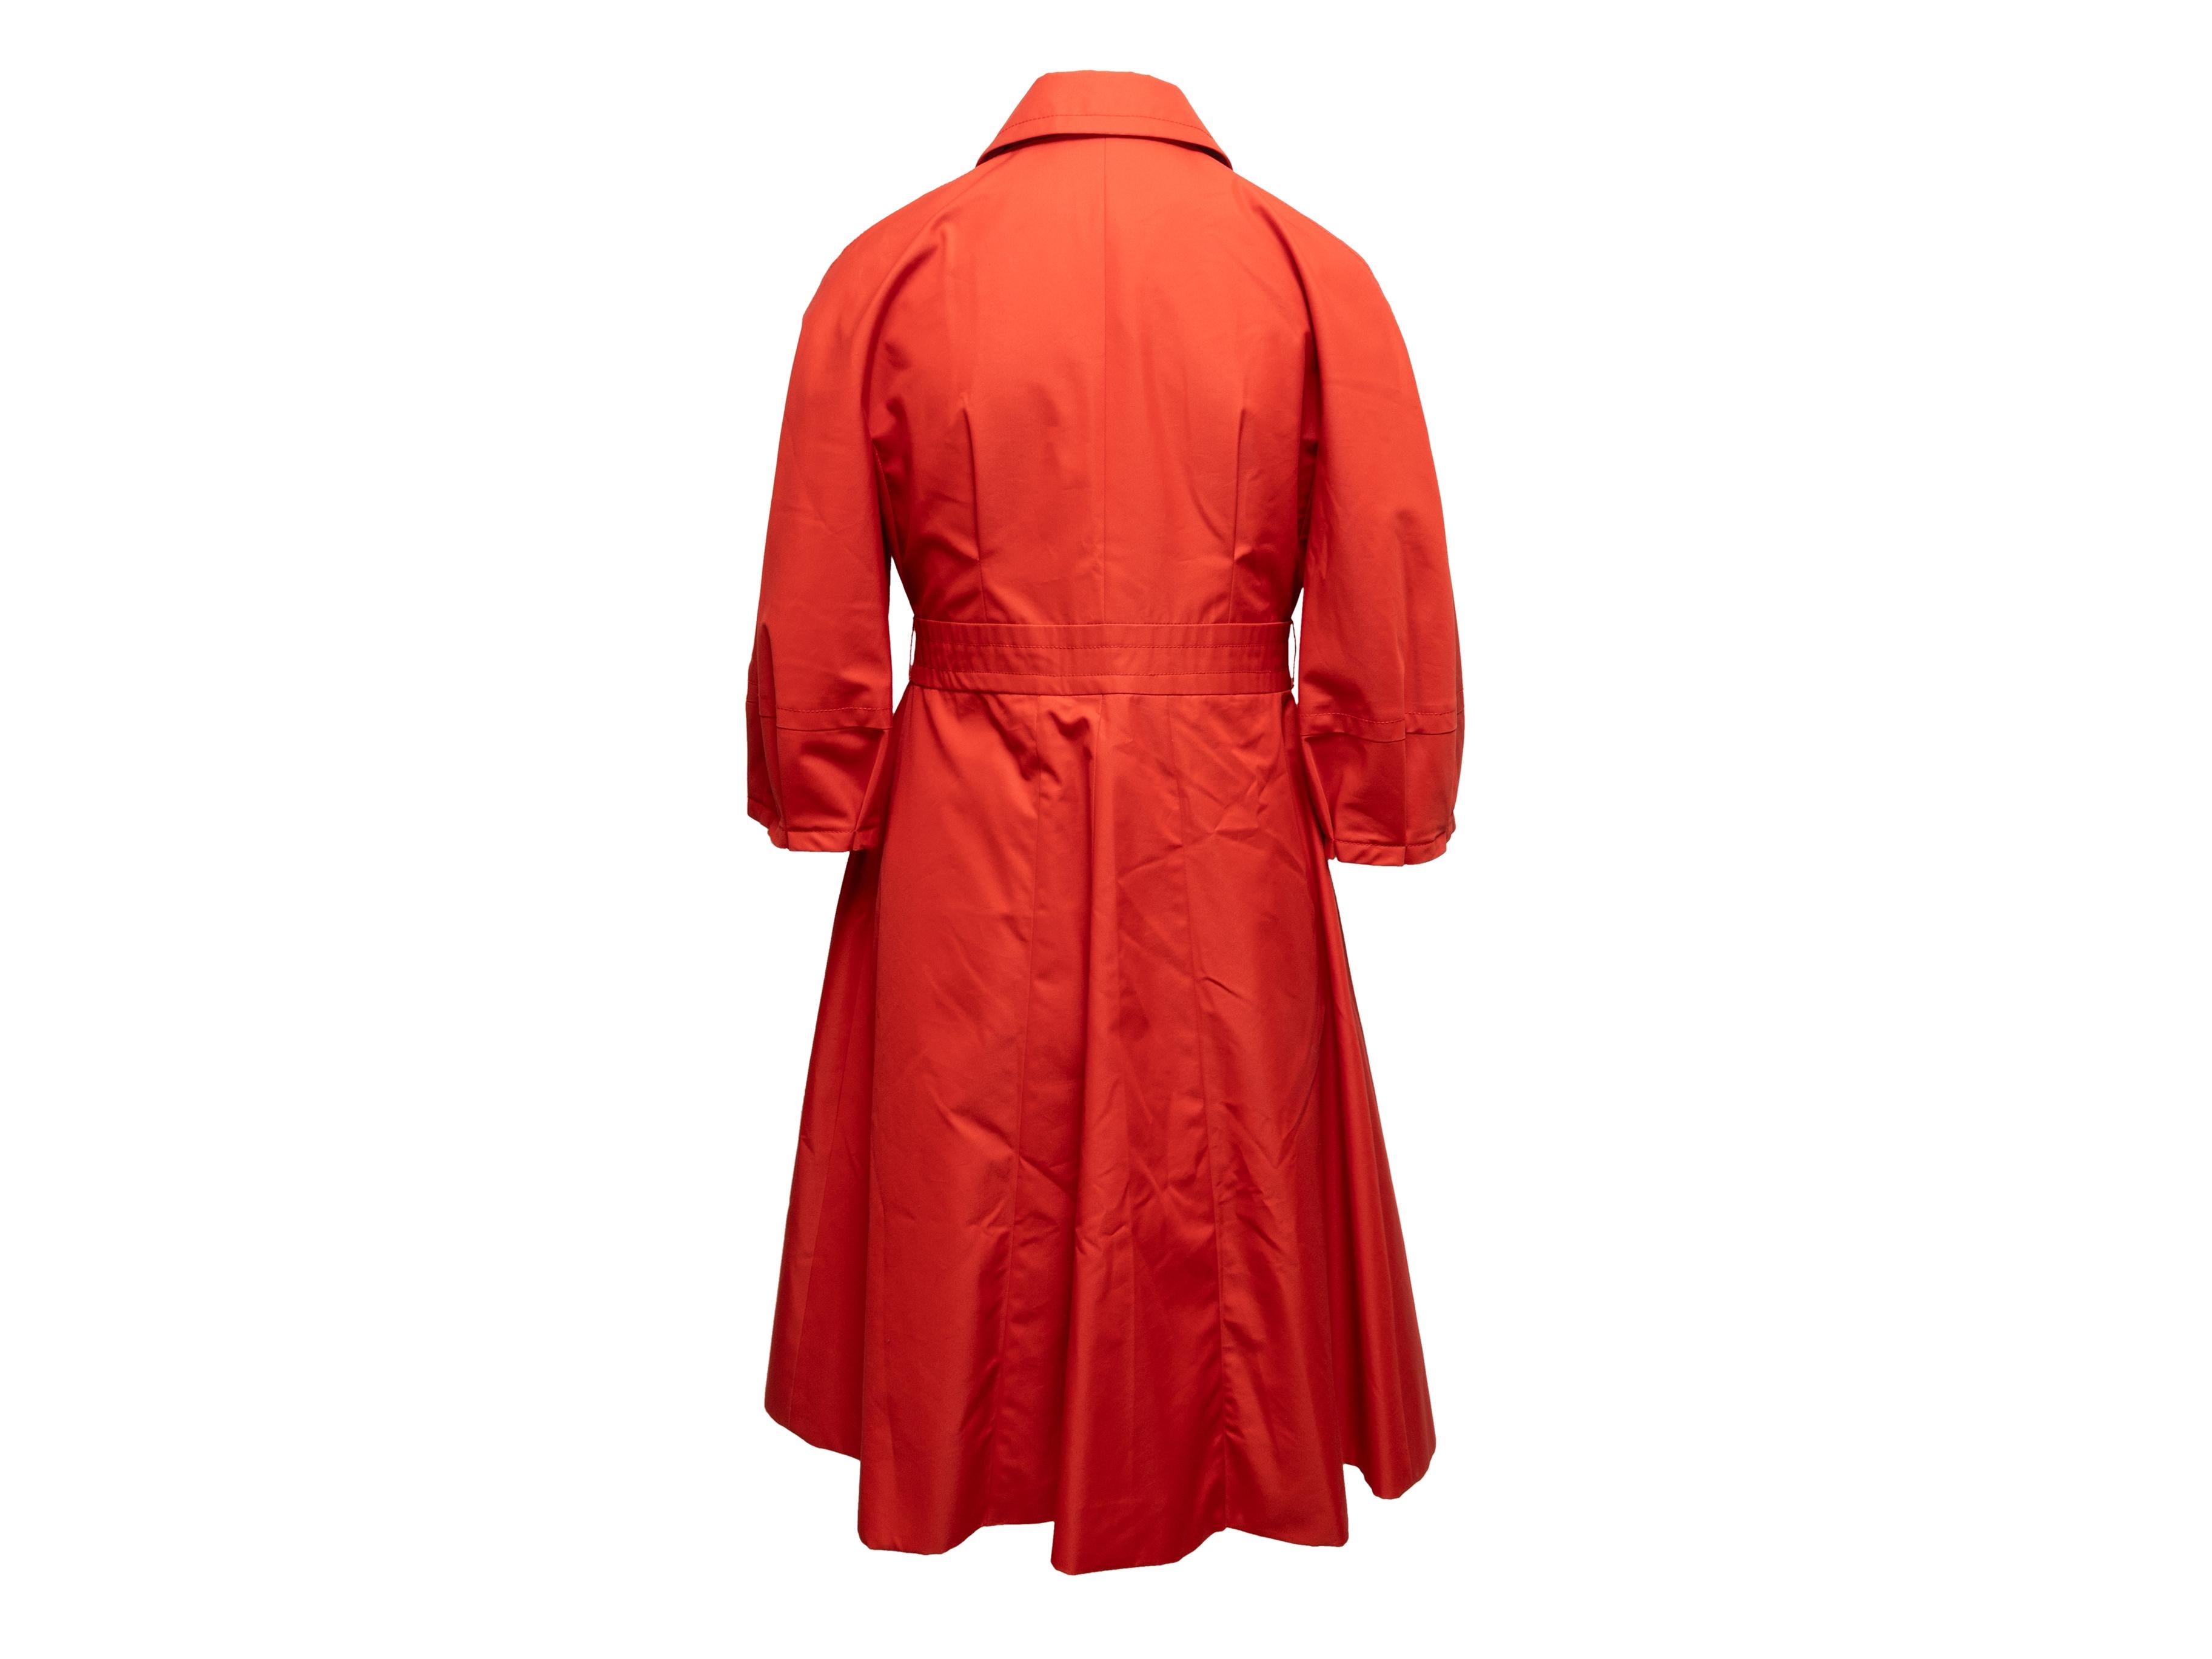 Blood orange three-quarter sleeve trench coat by Gucci. Pointed collar. Dual hip pockets. Button closures at front. Designer size 44. 30